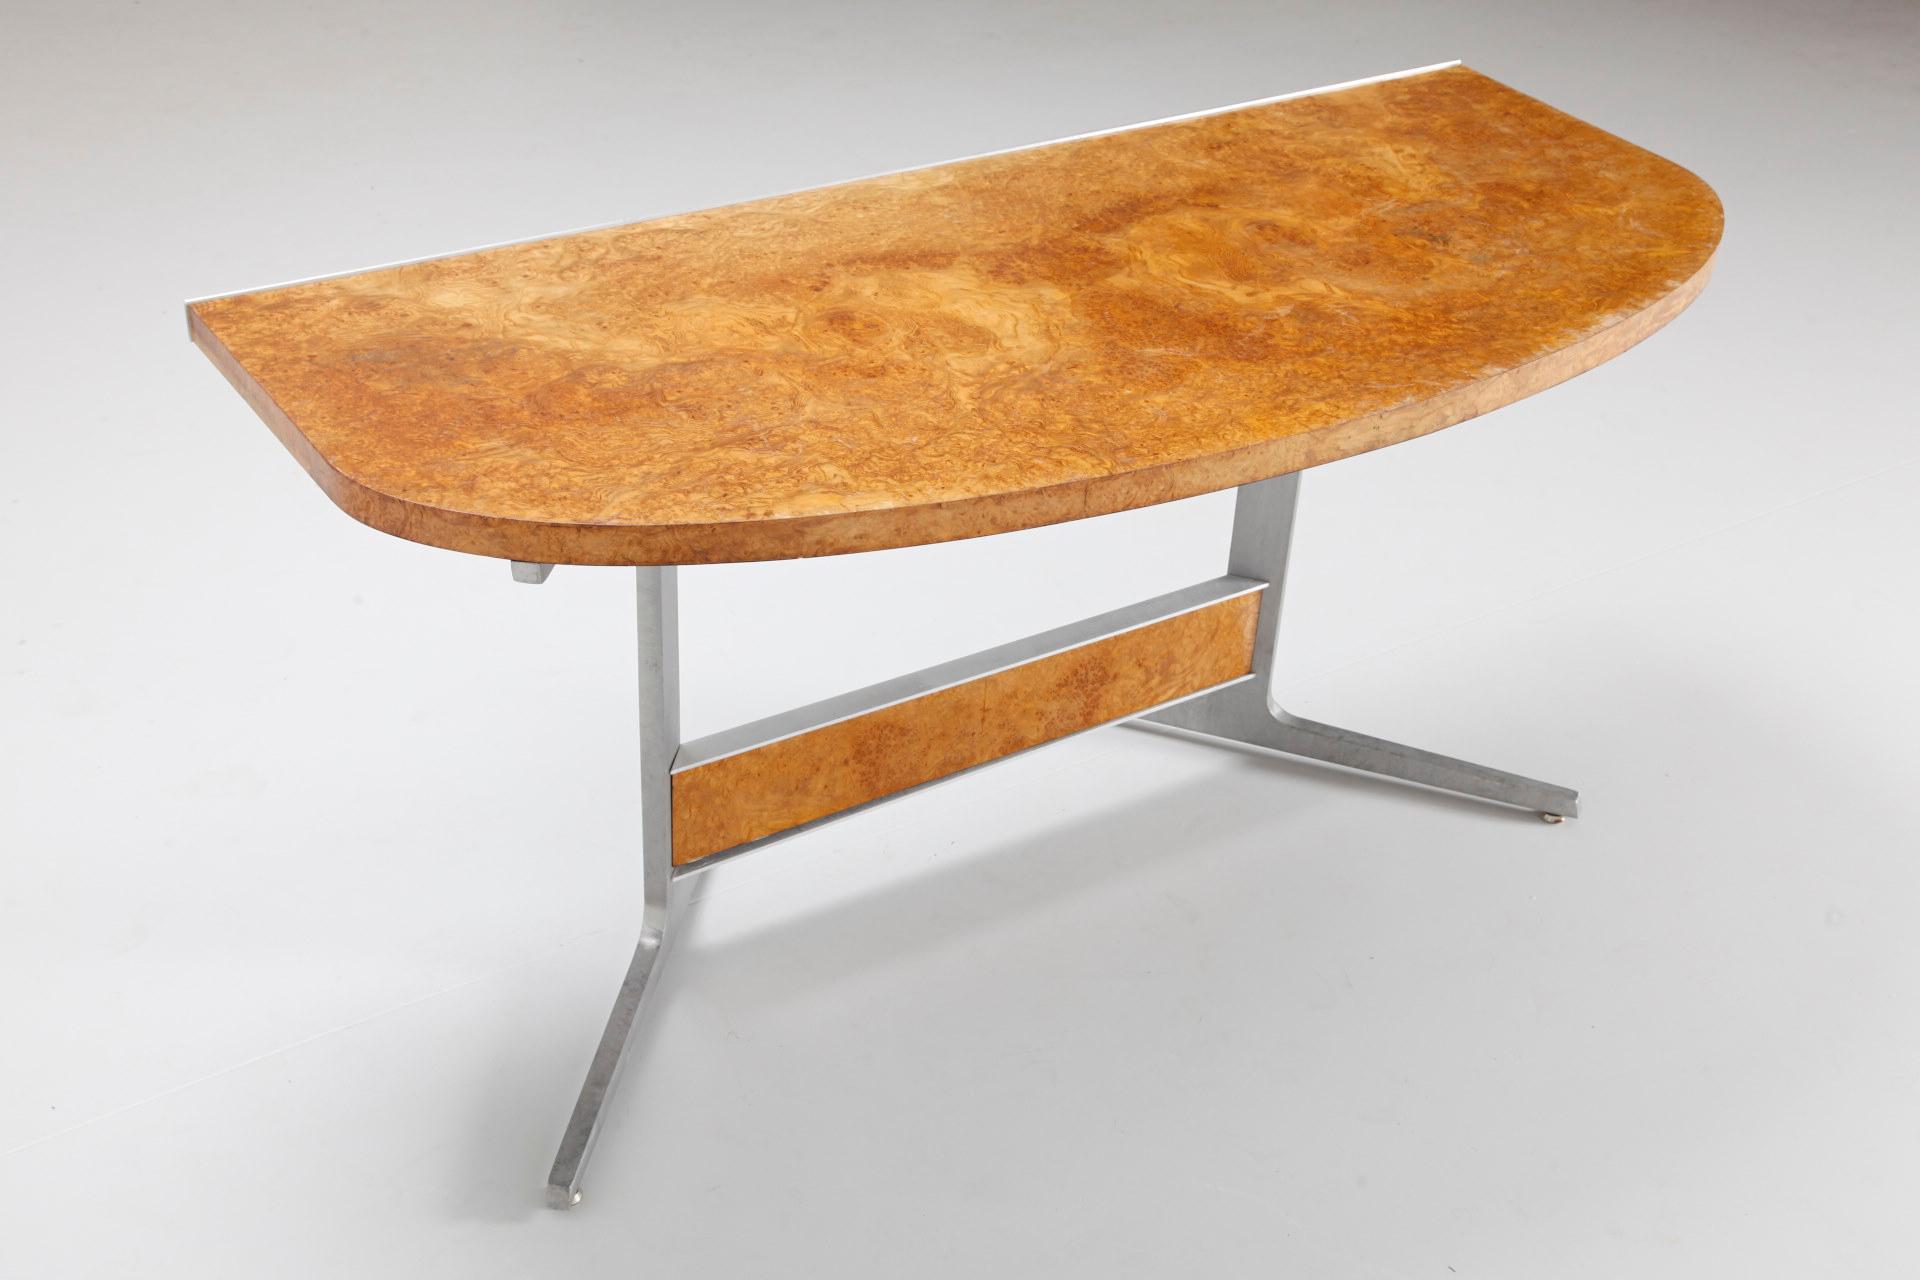 Hand-Crafted Burlwood Mid-Century Modern Floating Desk, Console, 1960s, France For Sale